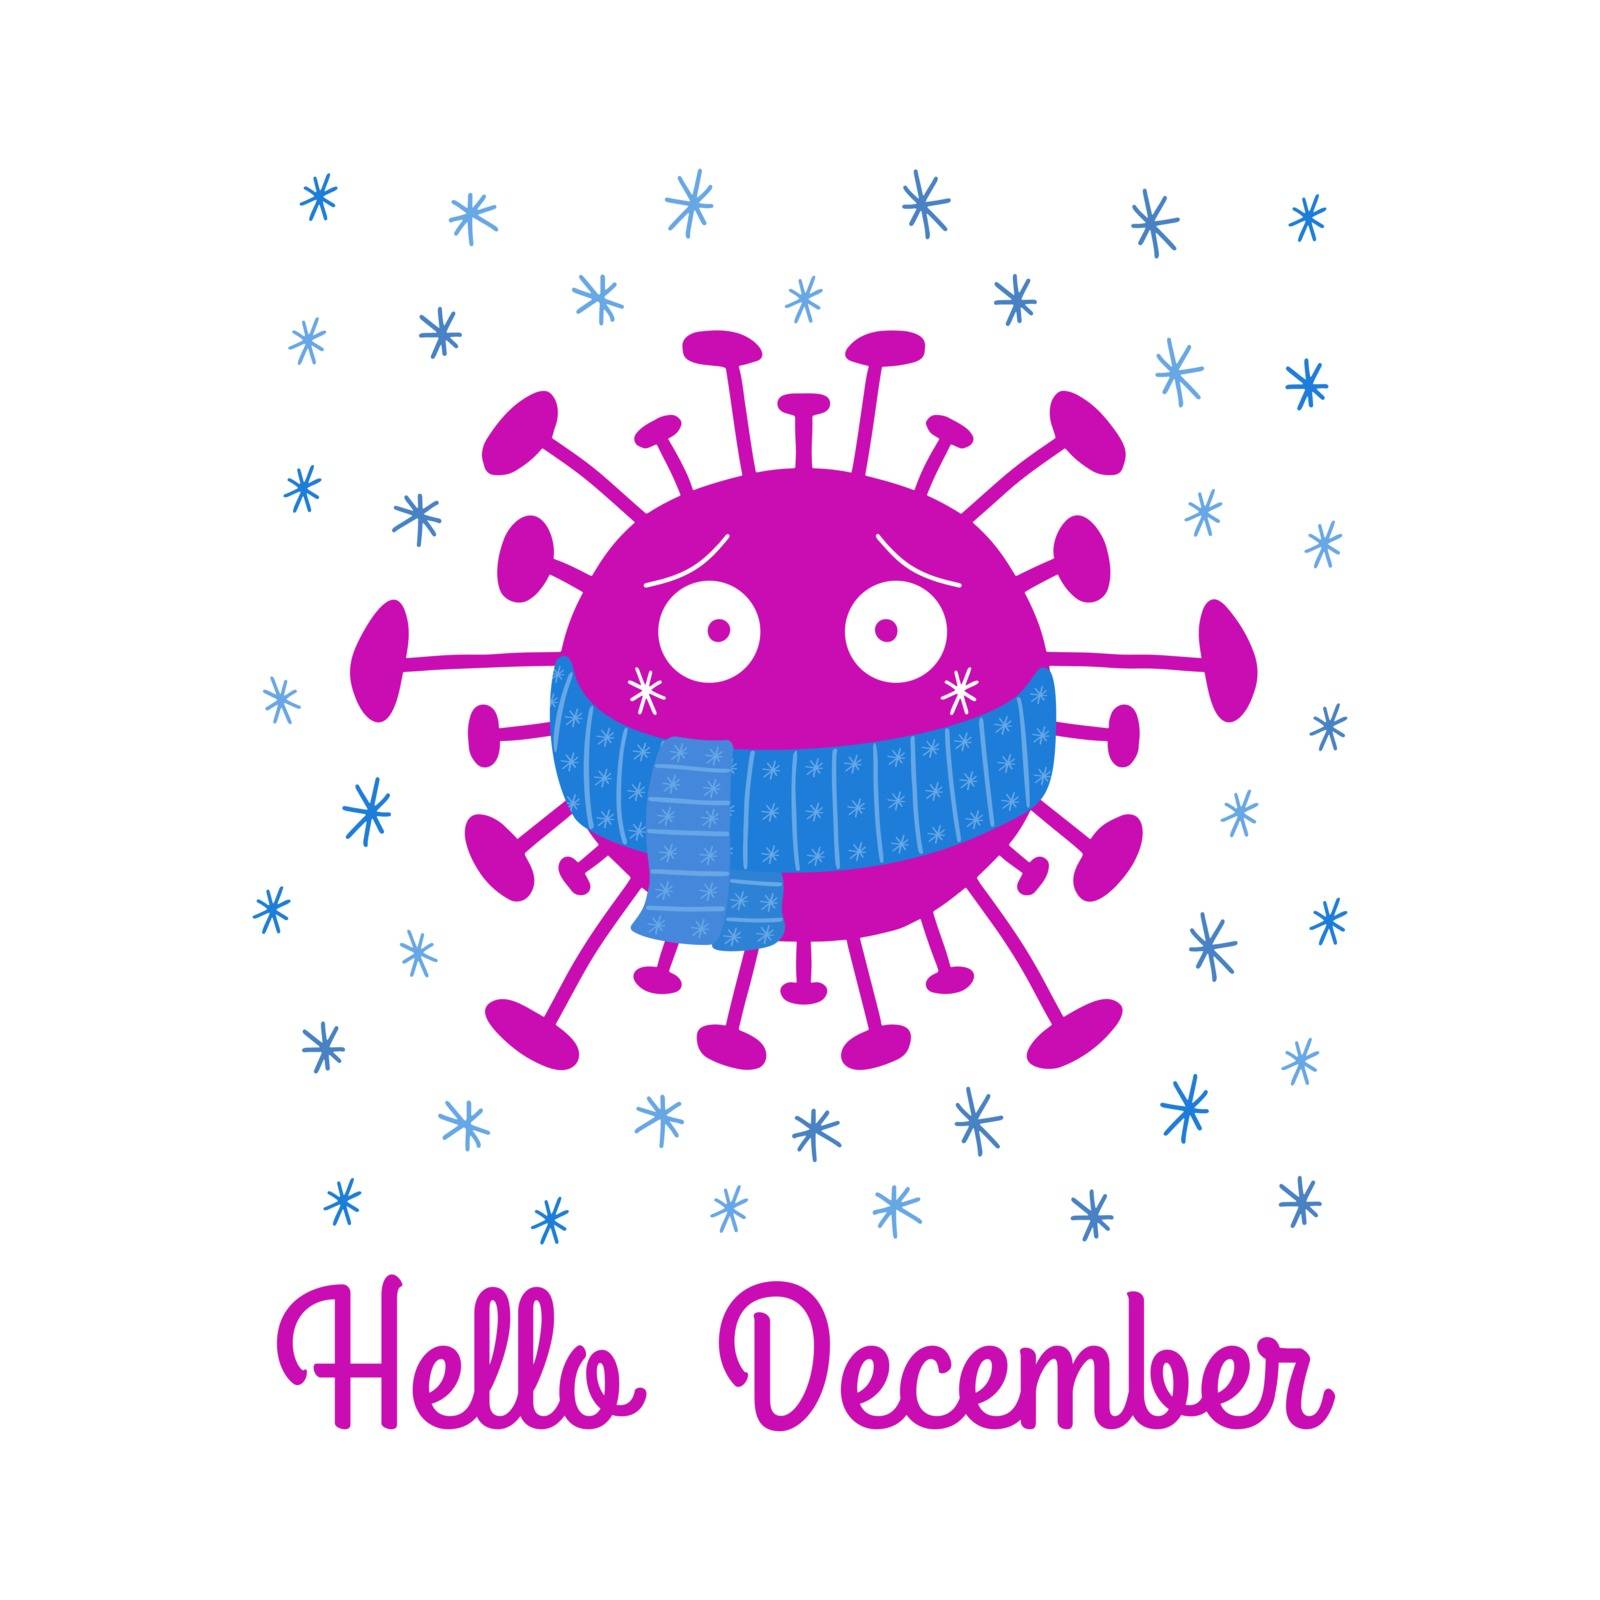 Hello December. Cartoon coronavirus bacteria in blue scarf with snowflakes. Isolated on white background. Vector stock illustration.